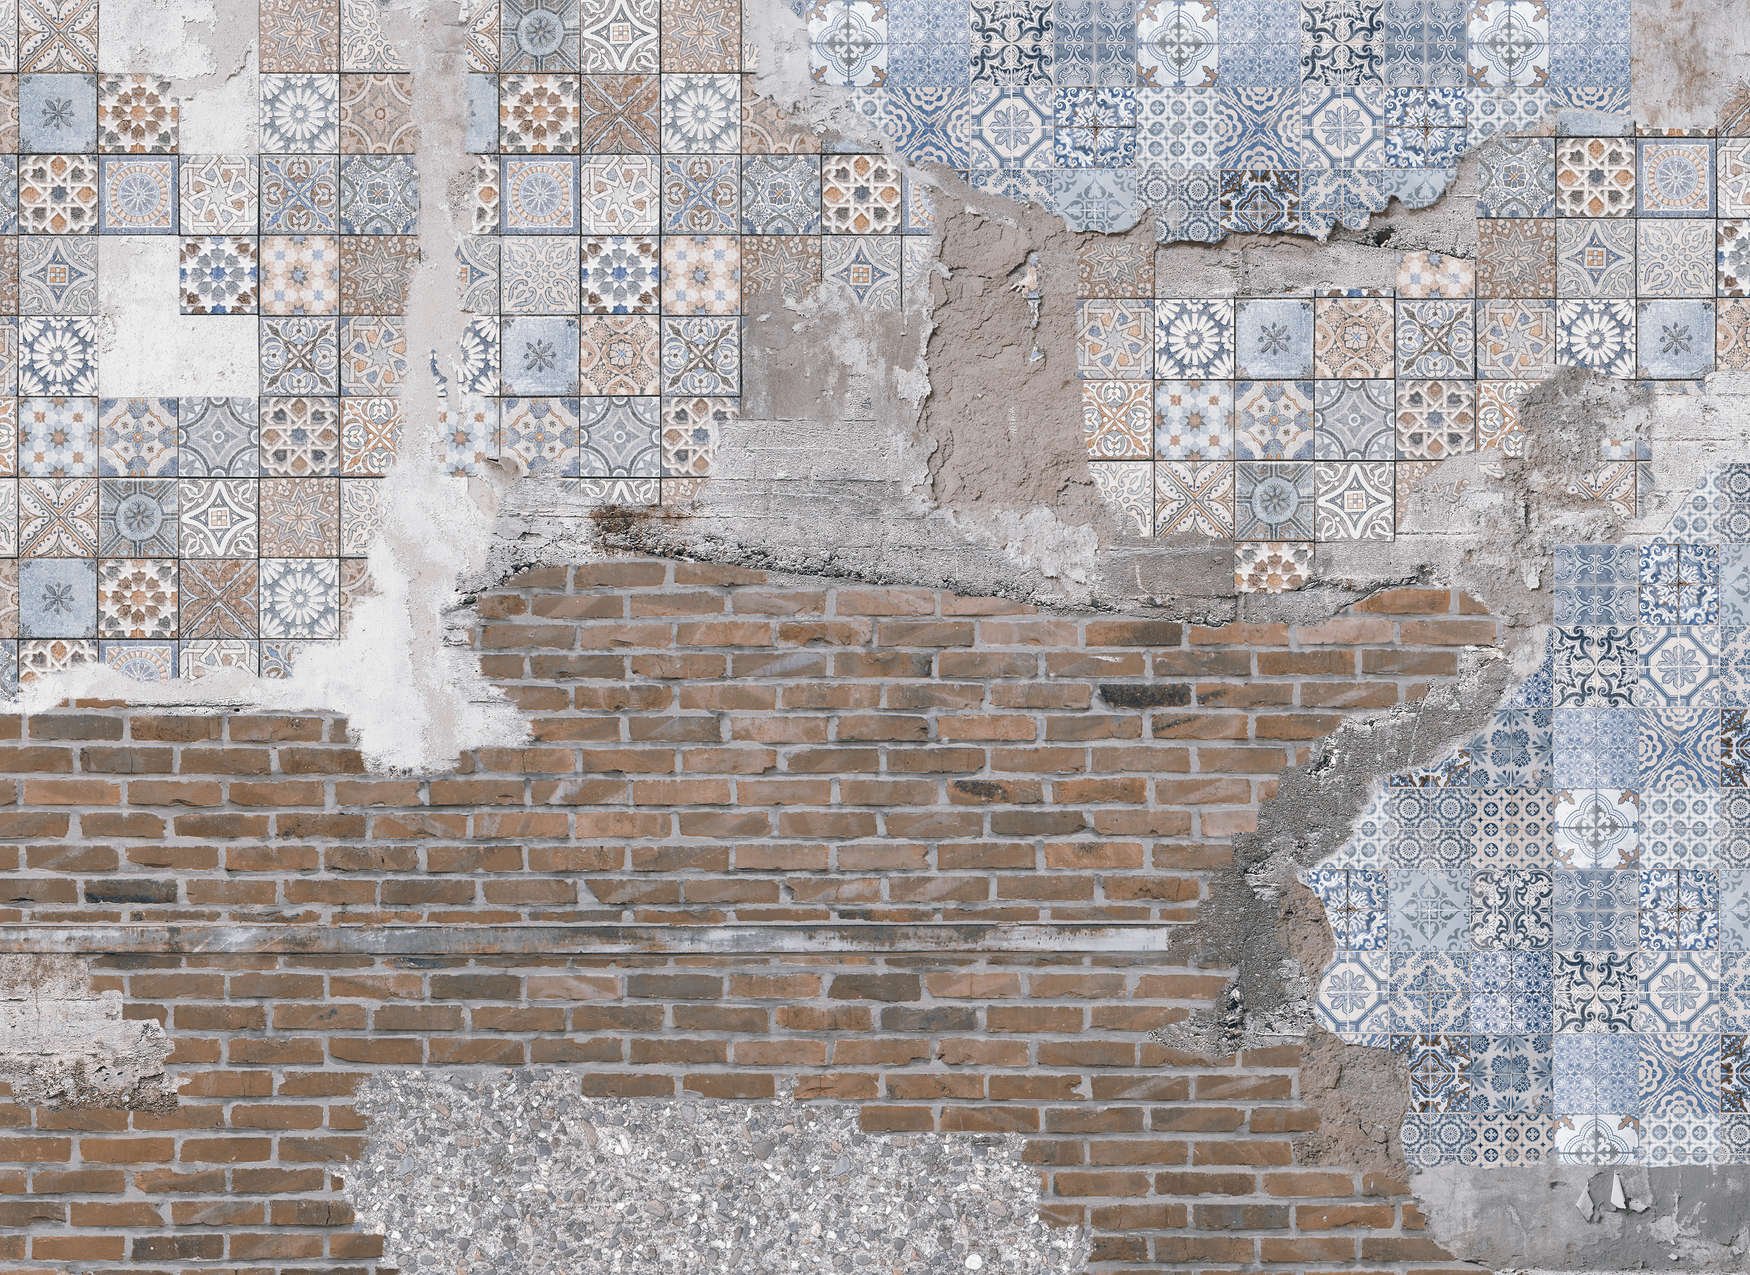             Photo wallpaper Brick Wall with Plastered Mosaic Stones - Brown, Blue, Grey
        